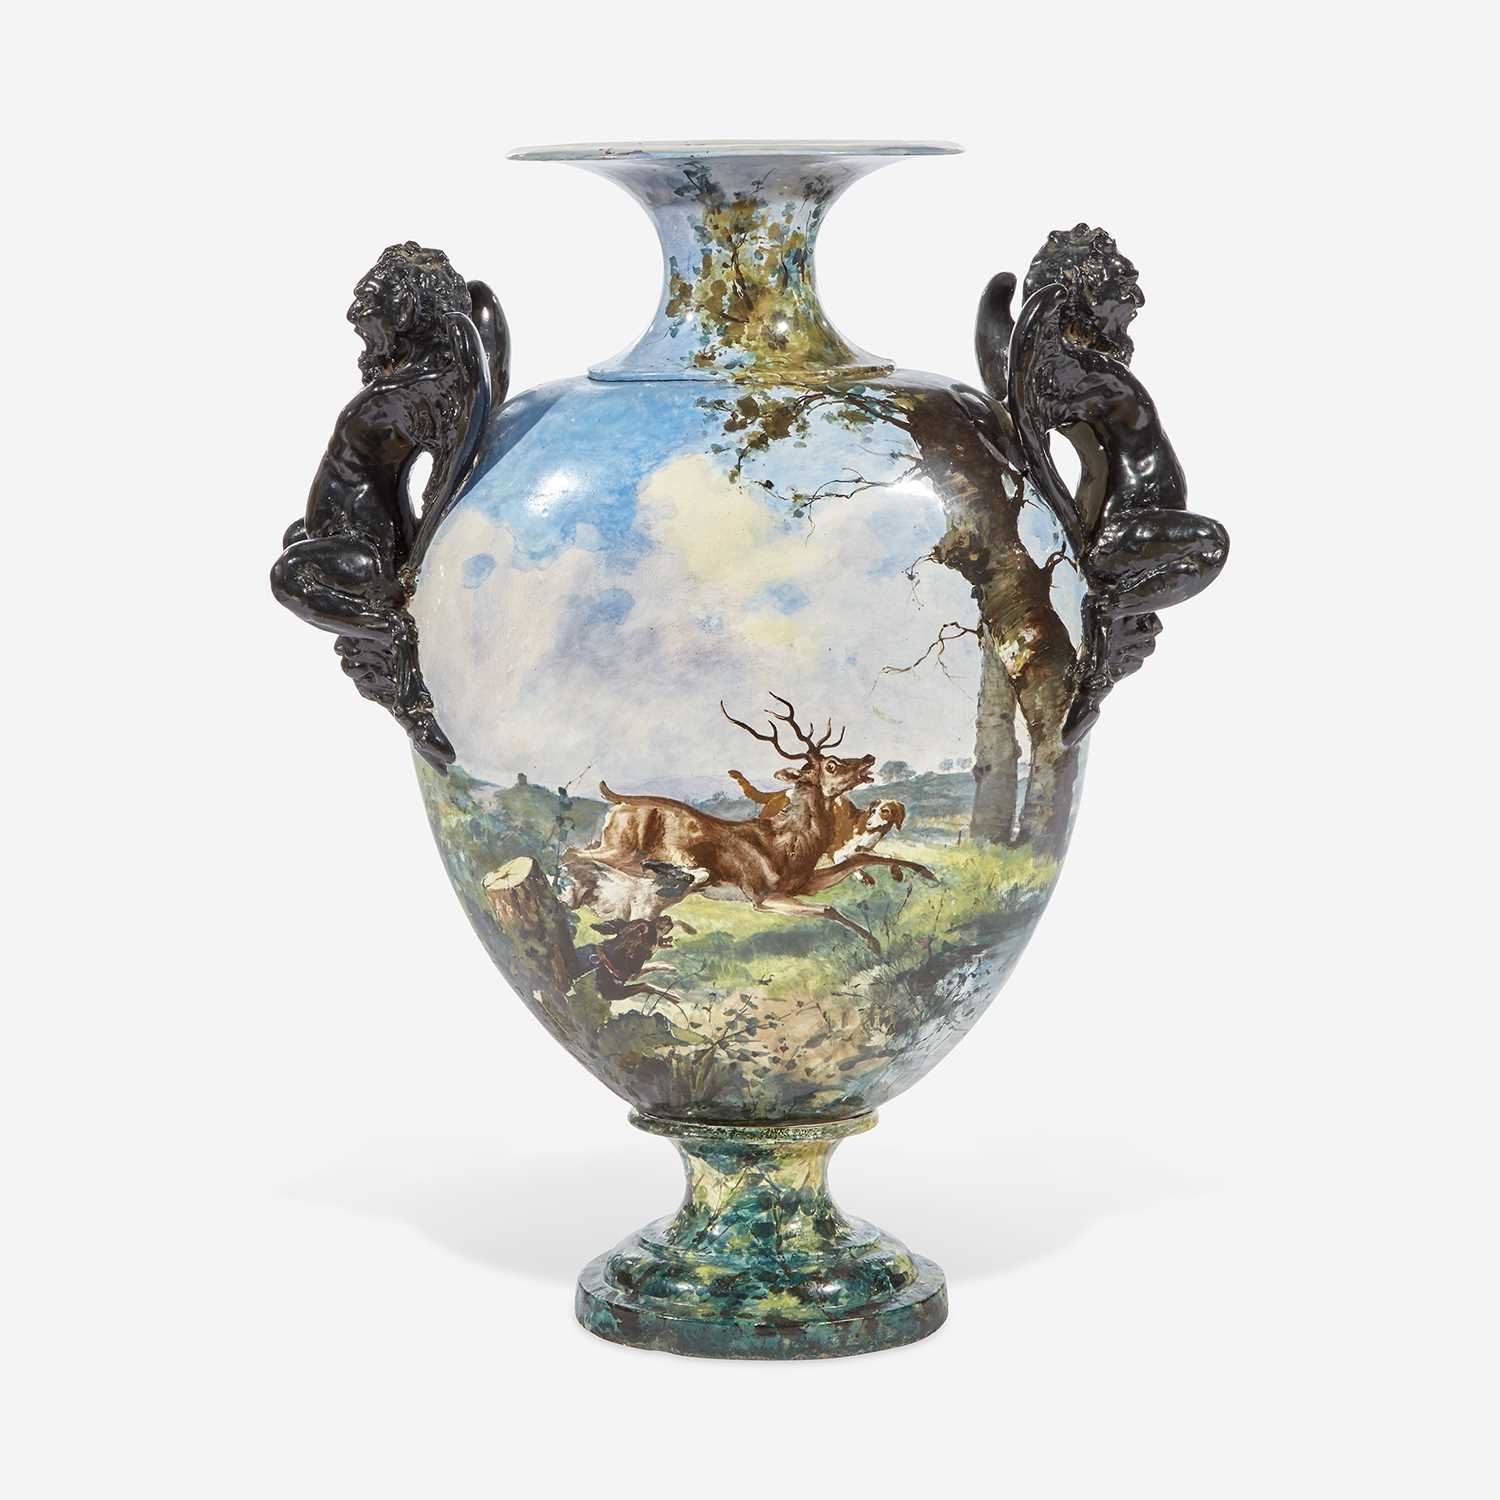 Lot 162 - A Large Continental Earthenware Vase